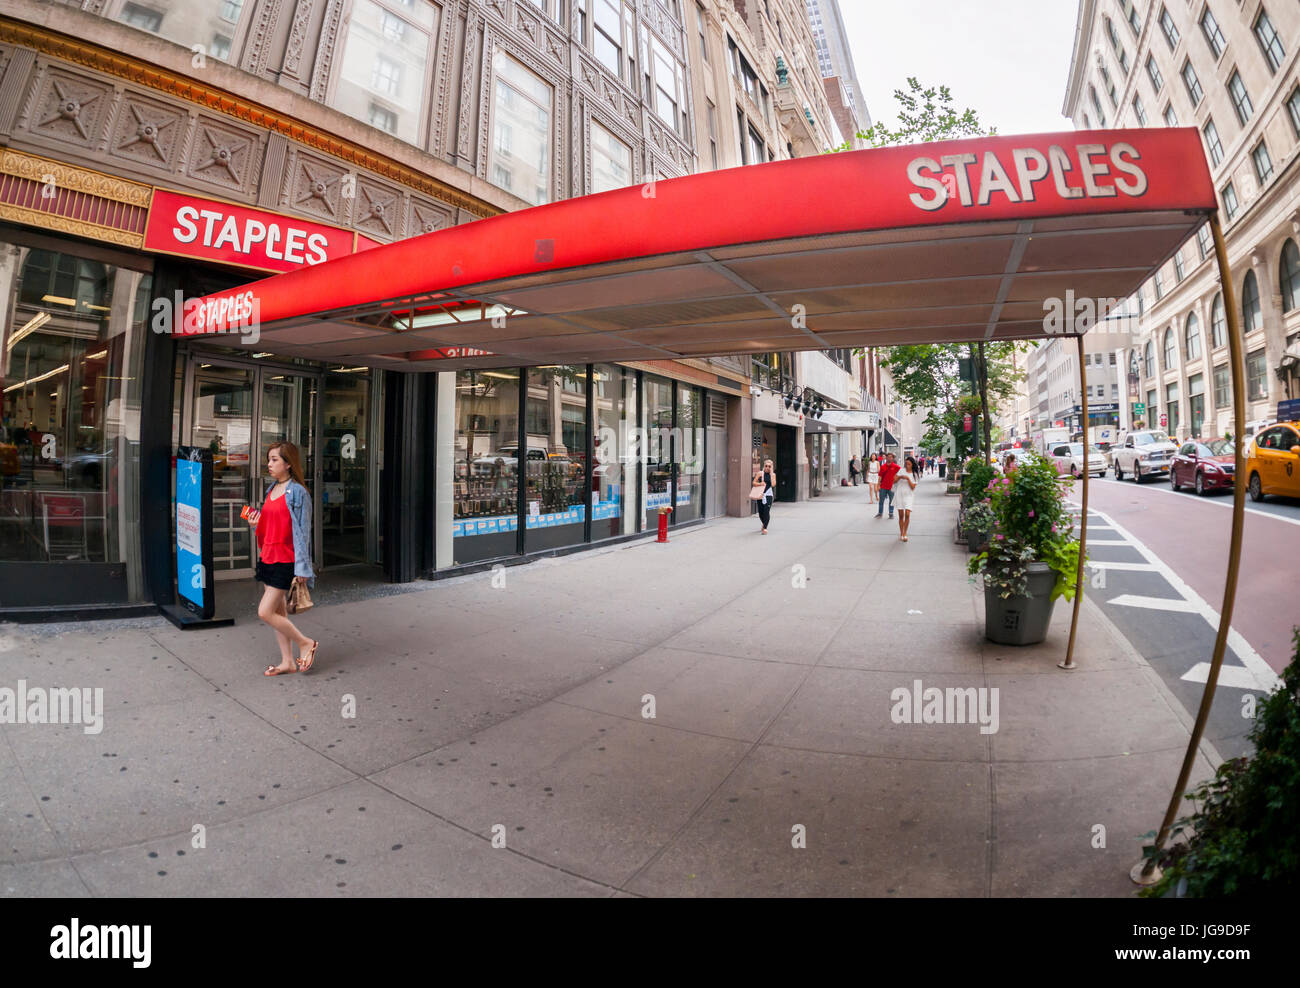 A Staples Office Supply Store In New York On Tuesday June 29 2017 JG9D9F 